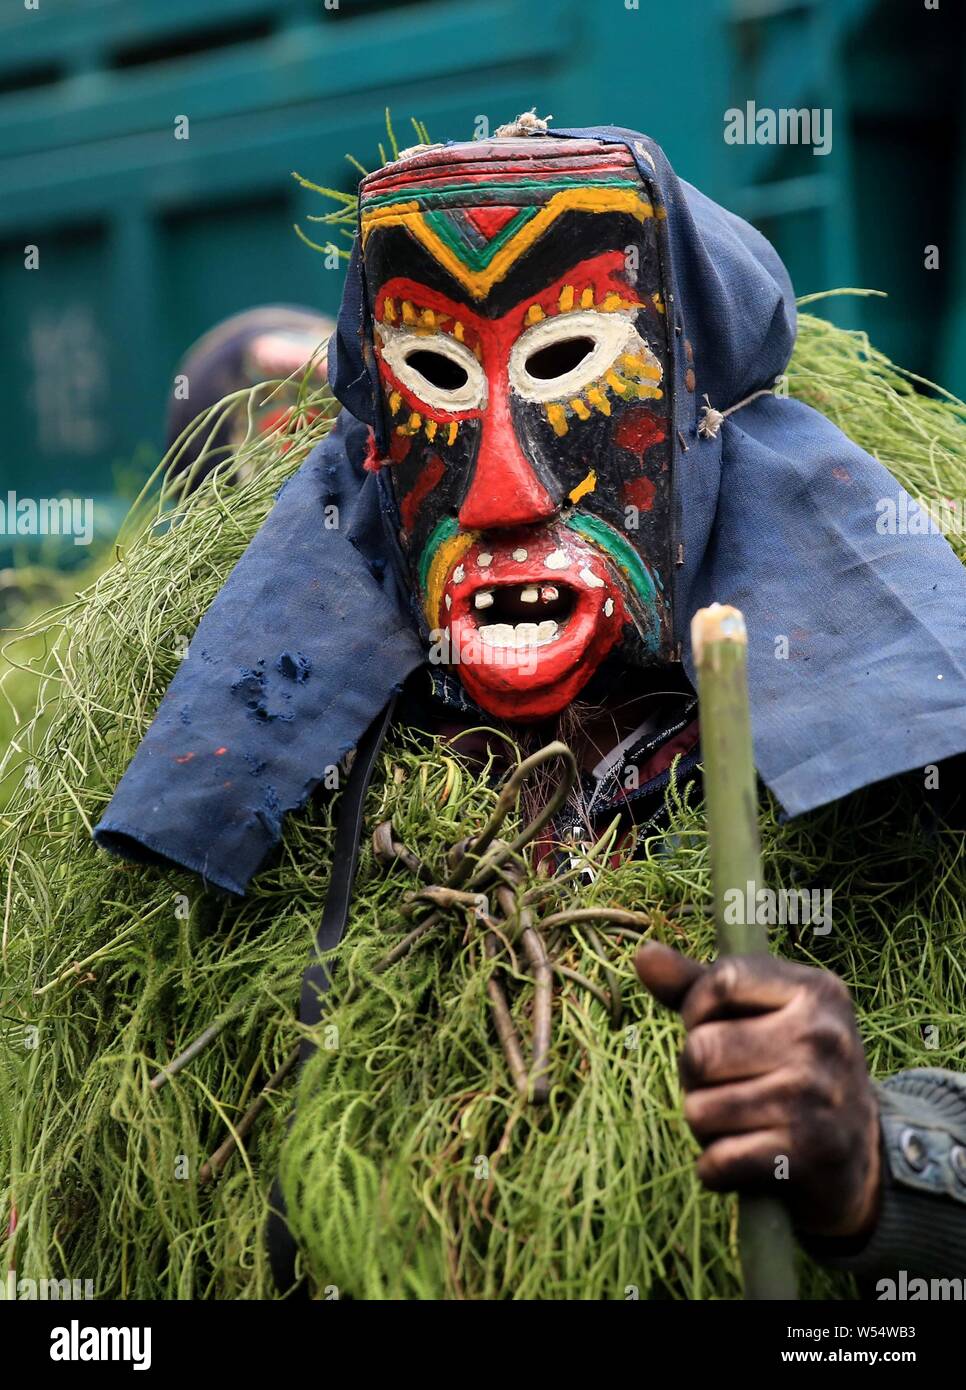 Chinese people of Miao ethnic group wearing masks and grassy cloaks dress up as the god to bring good luck to villagers during the Manggao Festival in Stock Photo